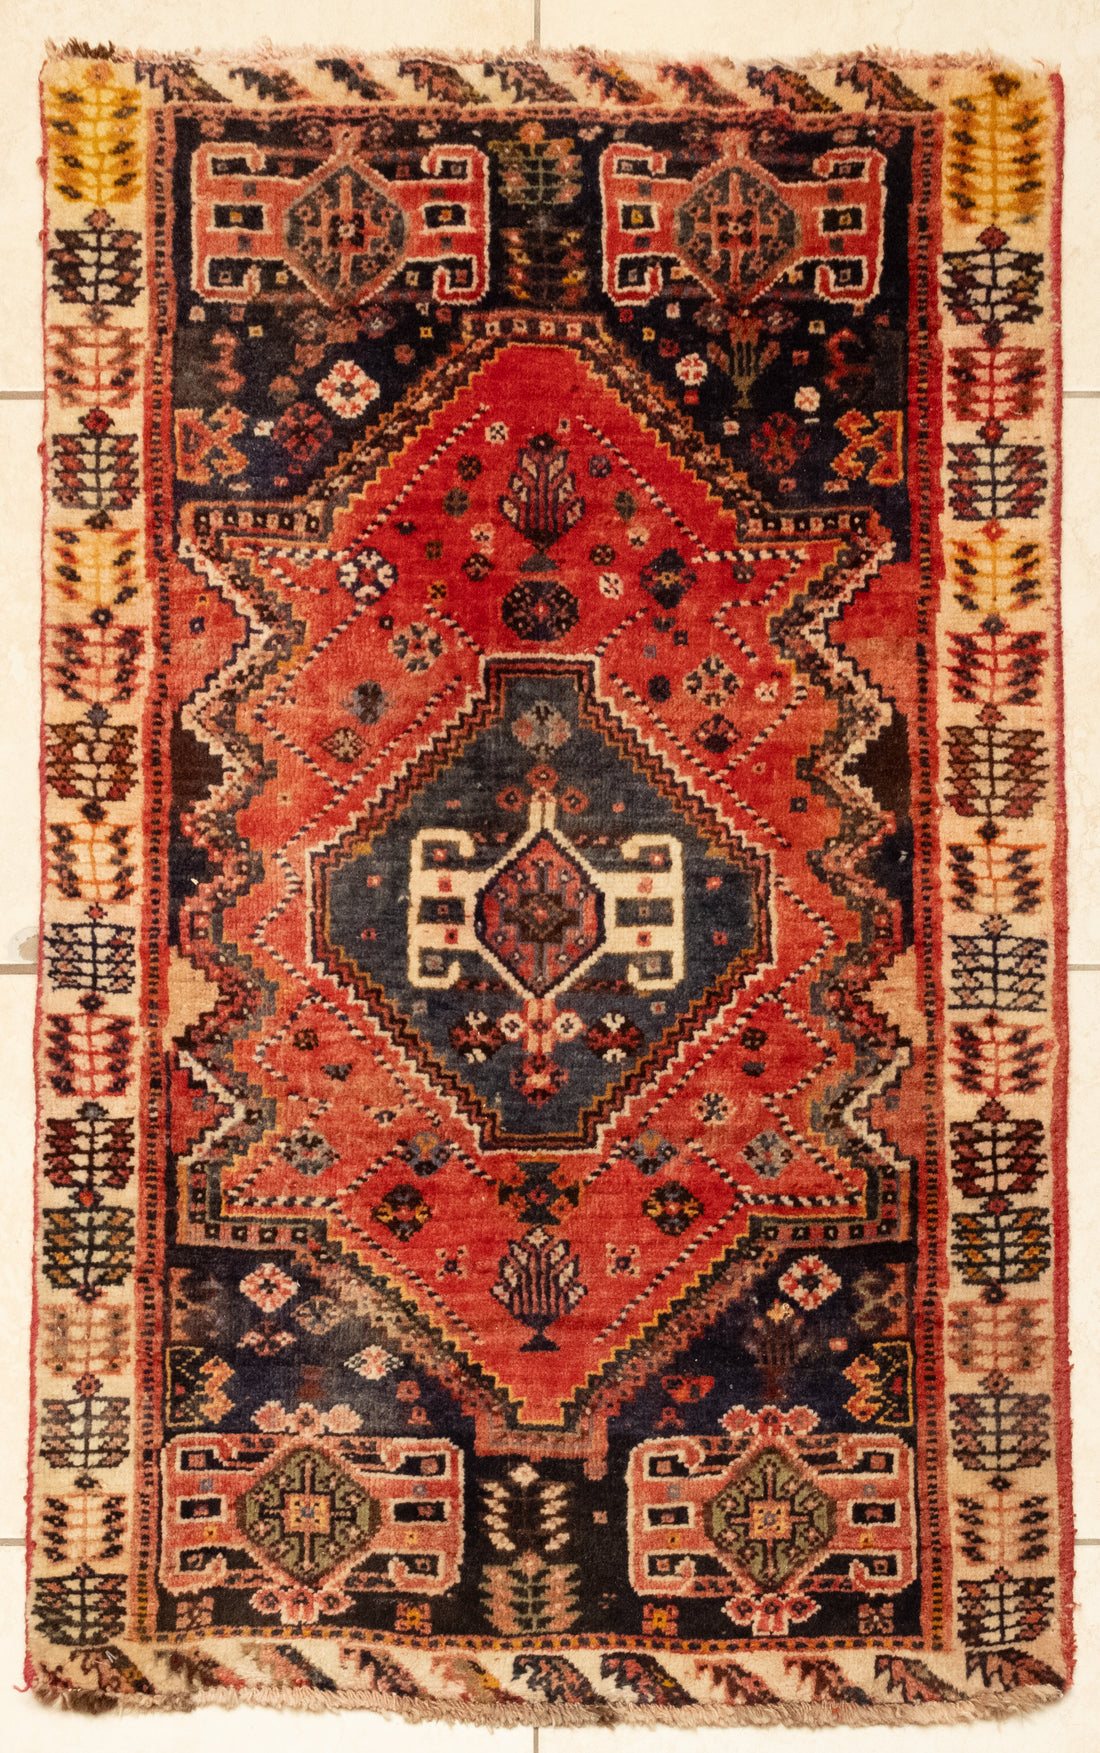 Hand-Knotted Wool Shiraz Rug 4'3" x 2'8"